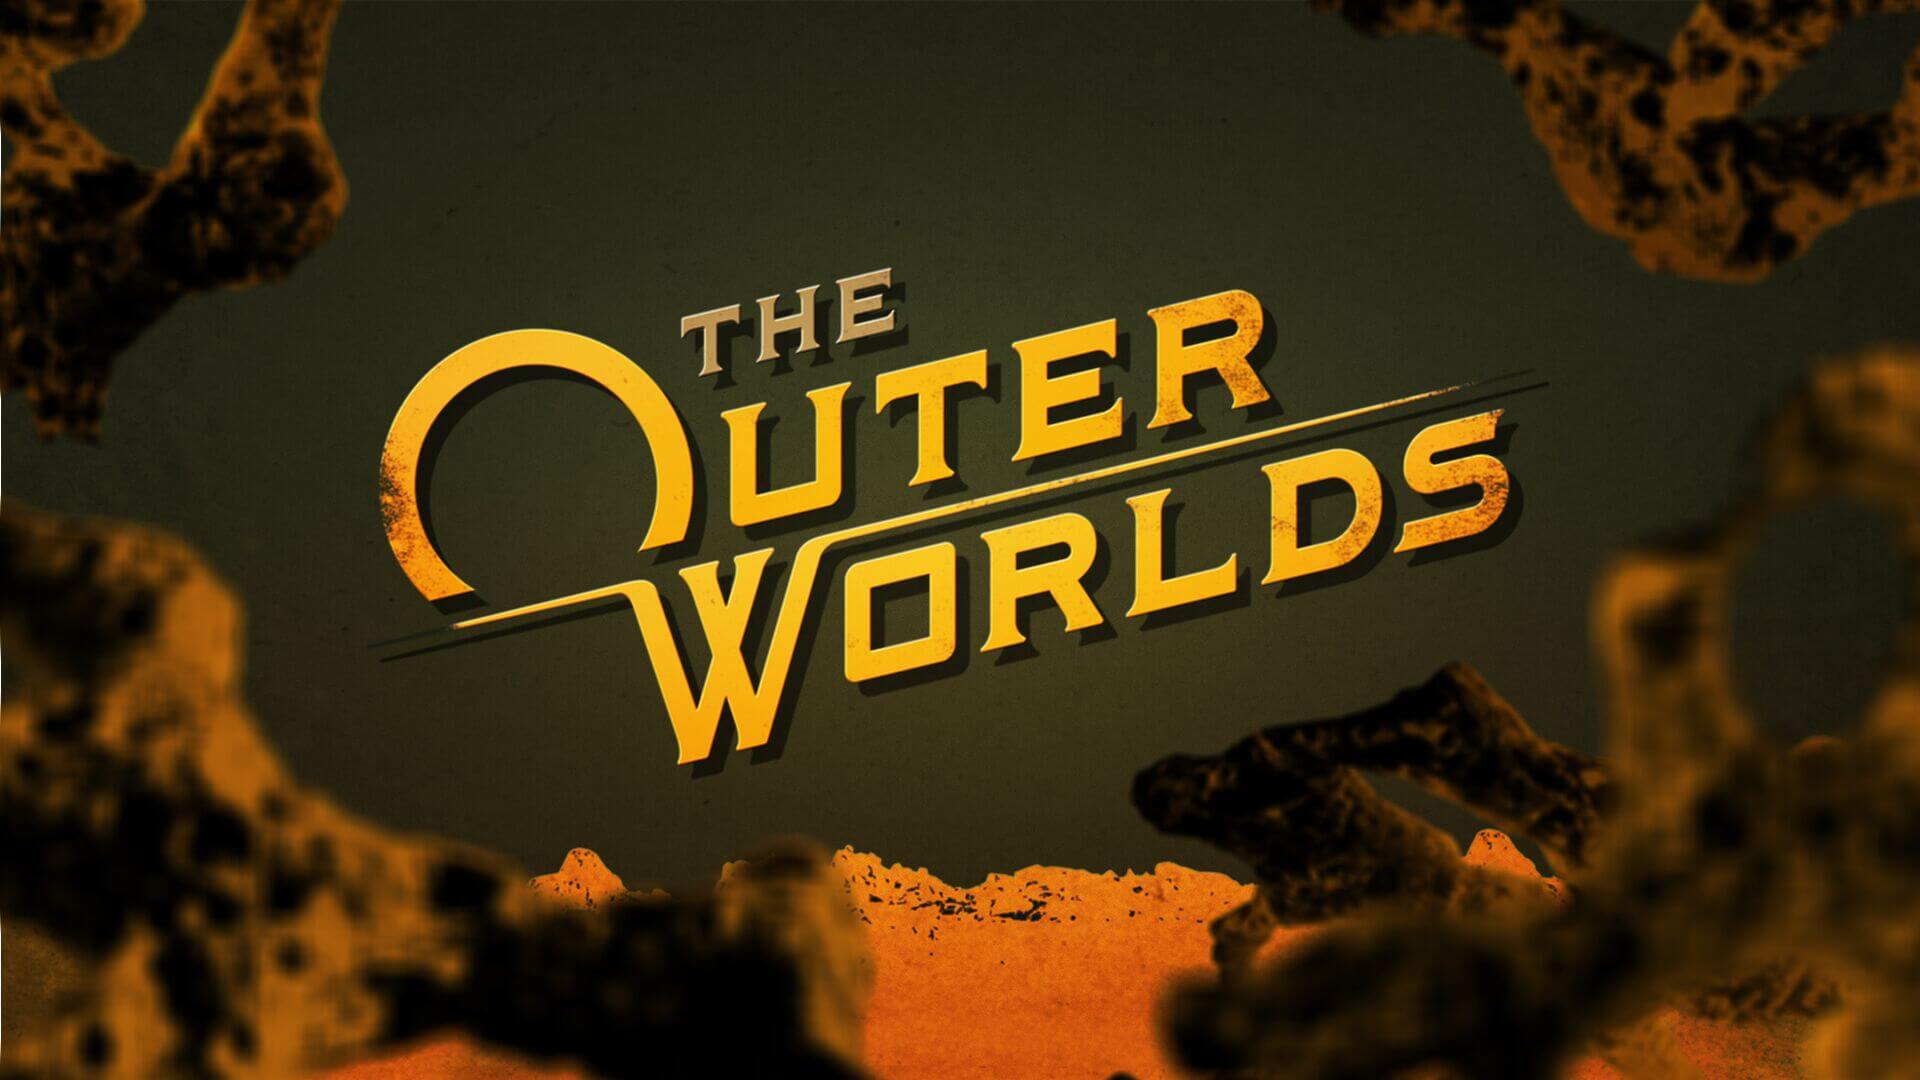 The Outer Worlds Review –